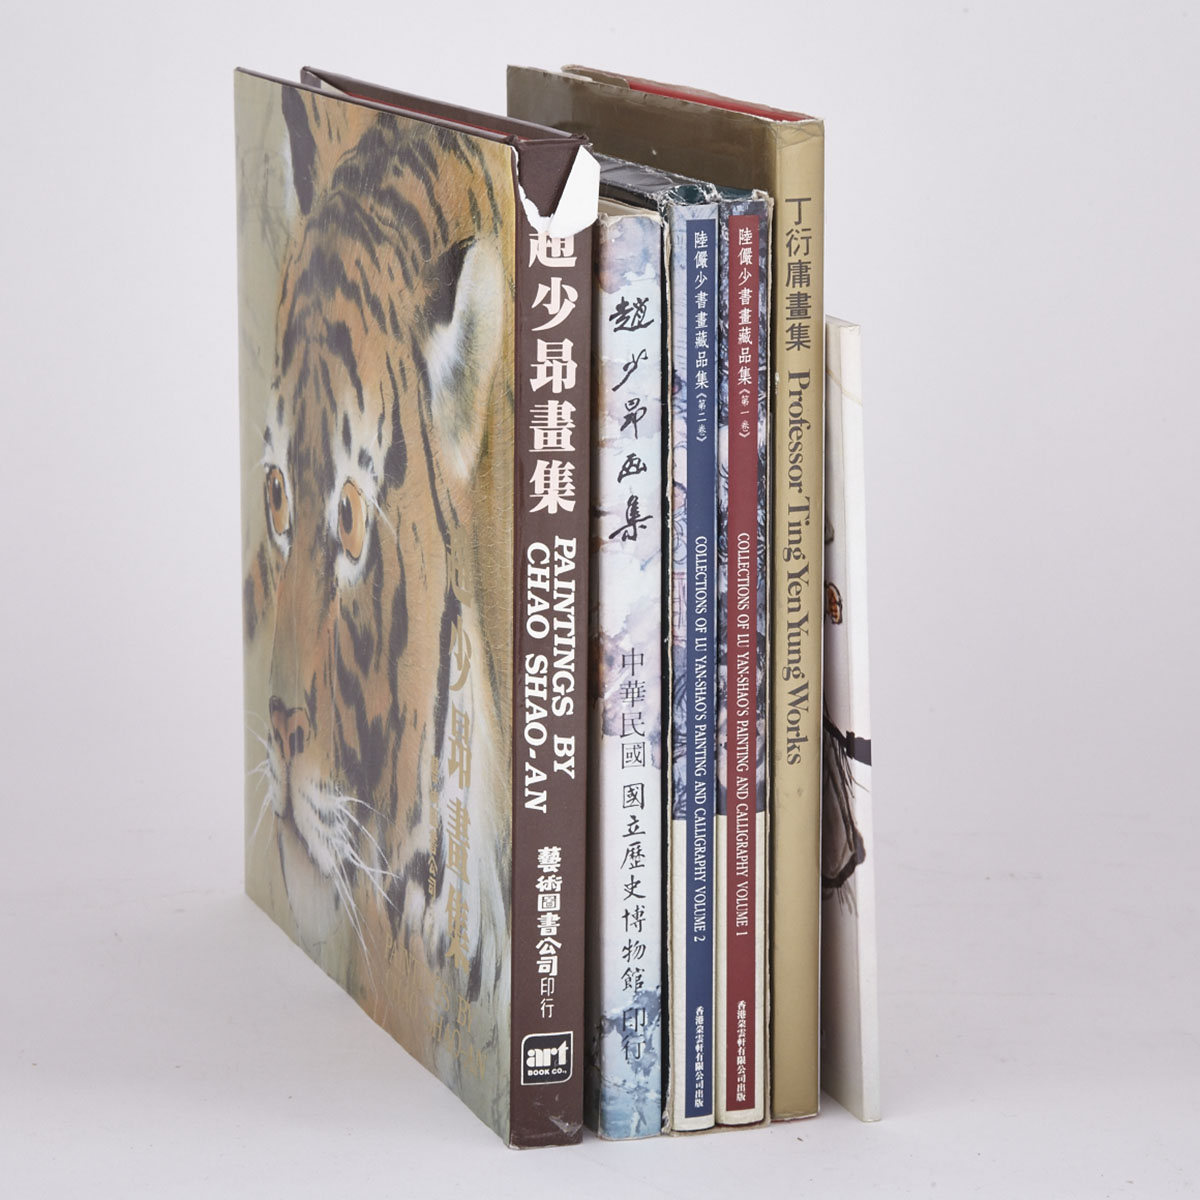 5 Volumes on Modern Chinese Painting Masters